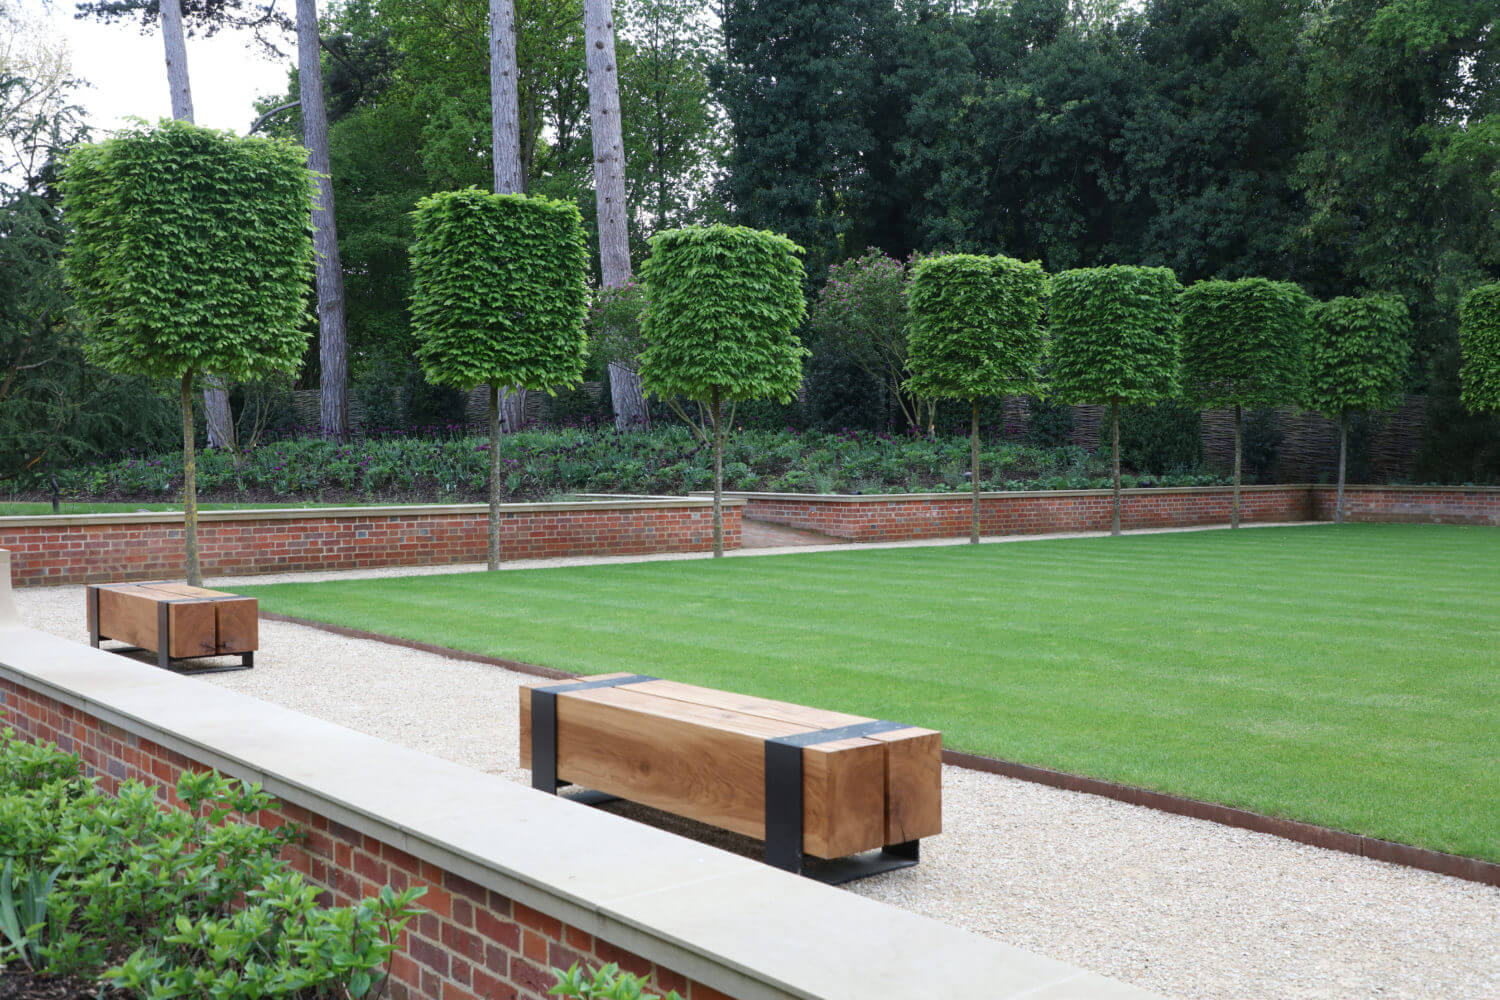 Harpsden Wood House bowling green with benches and cube head shaped trees